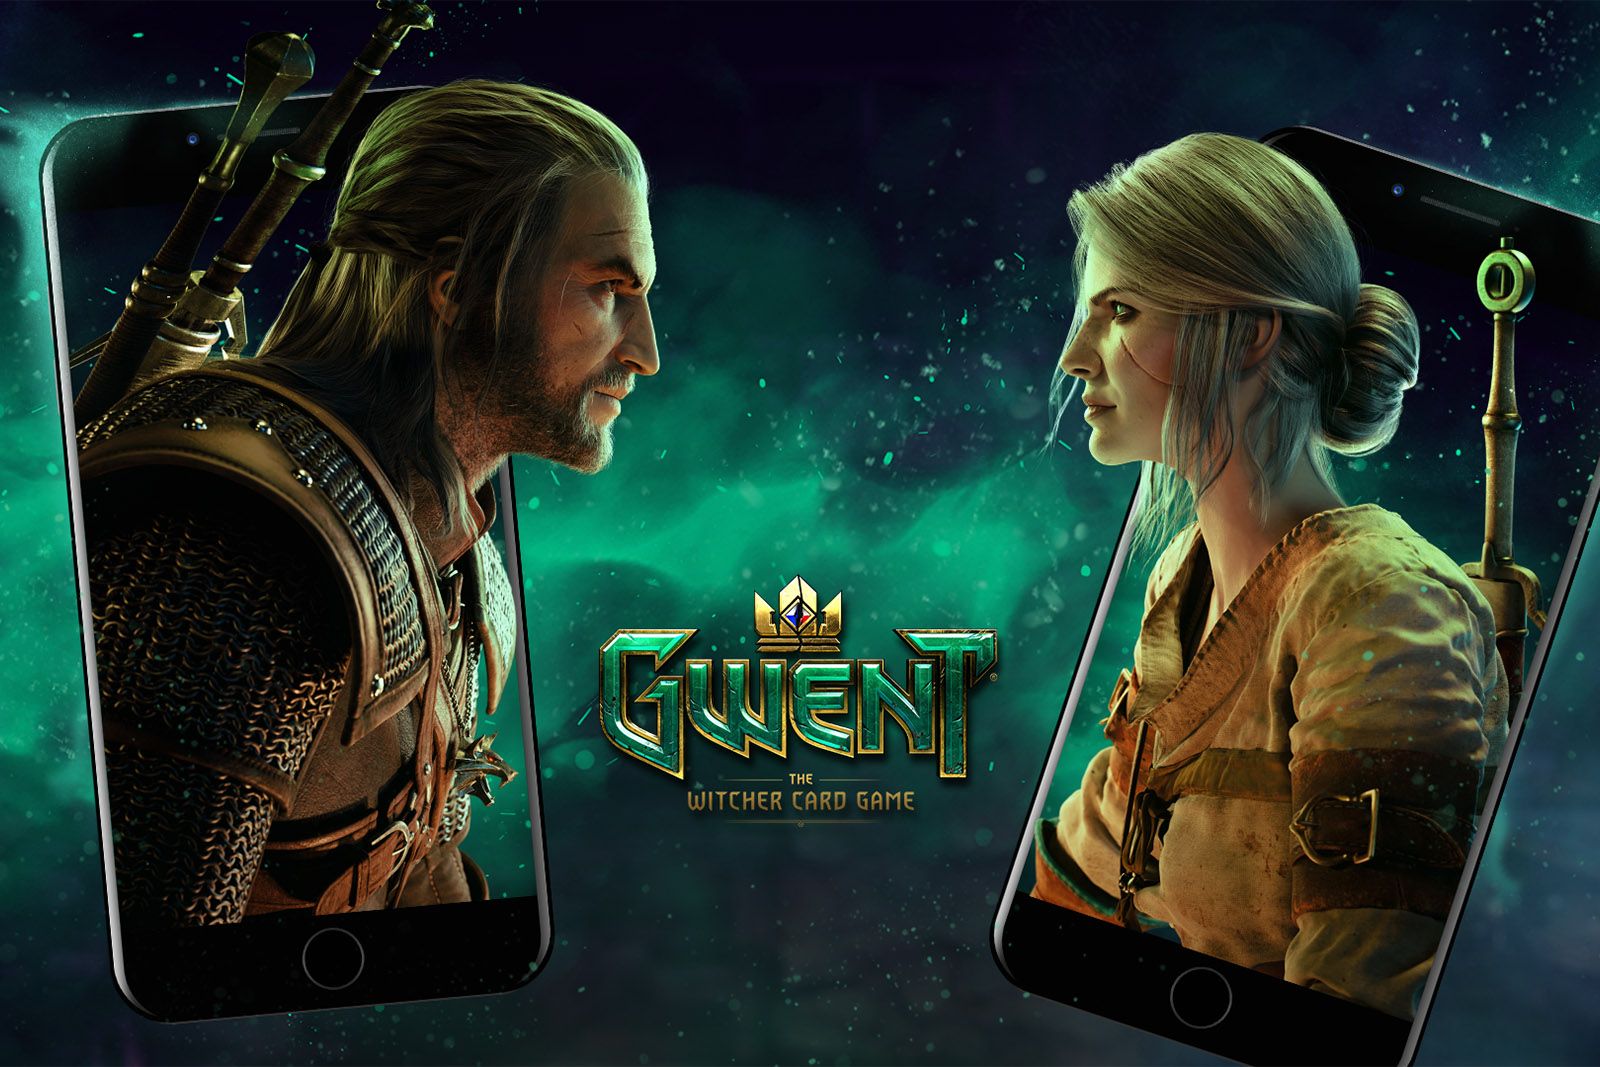 Gwent The Witcher Card Game coming to iOS and Android move over Hearthstone image 1